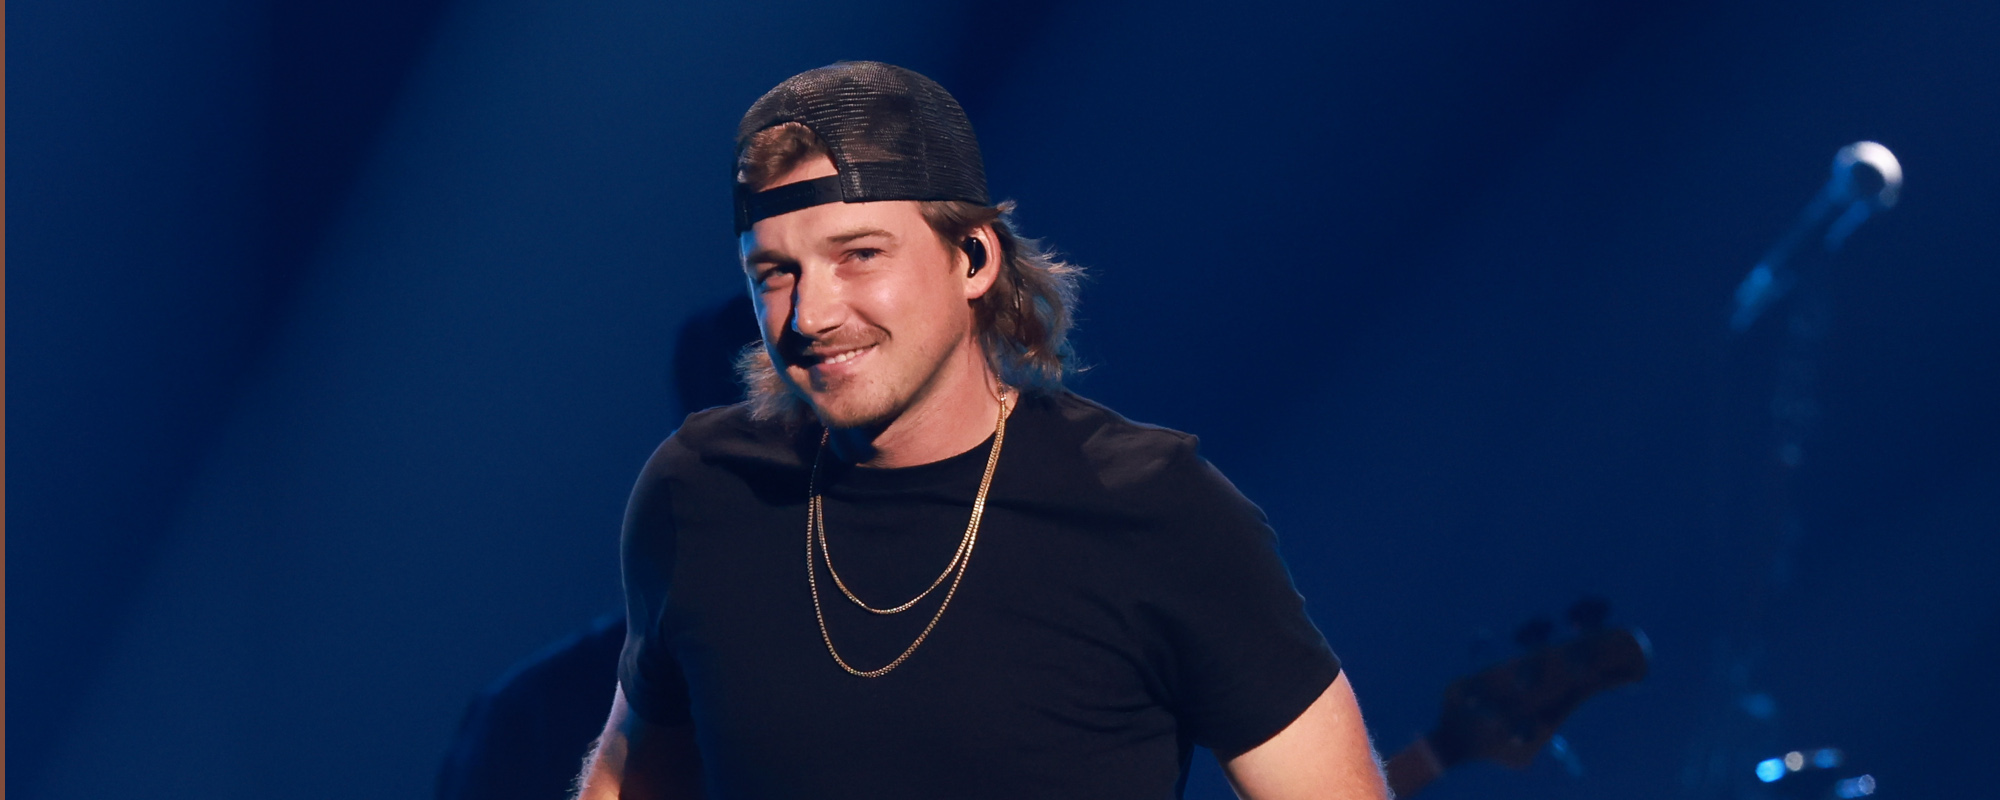 Meaning Behind the Song “Last Night” by Morgan Wallen